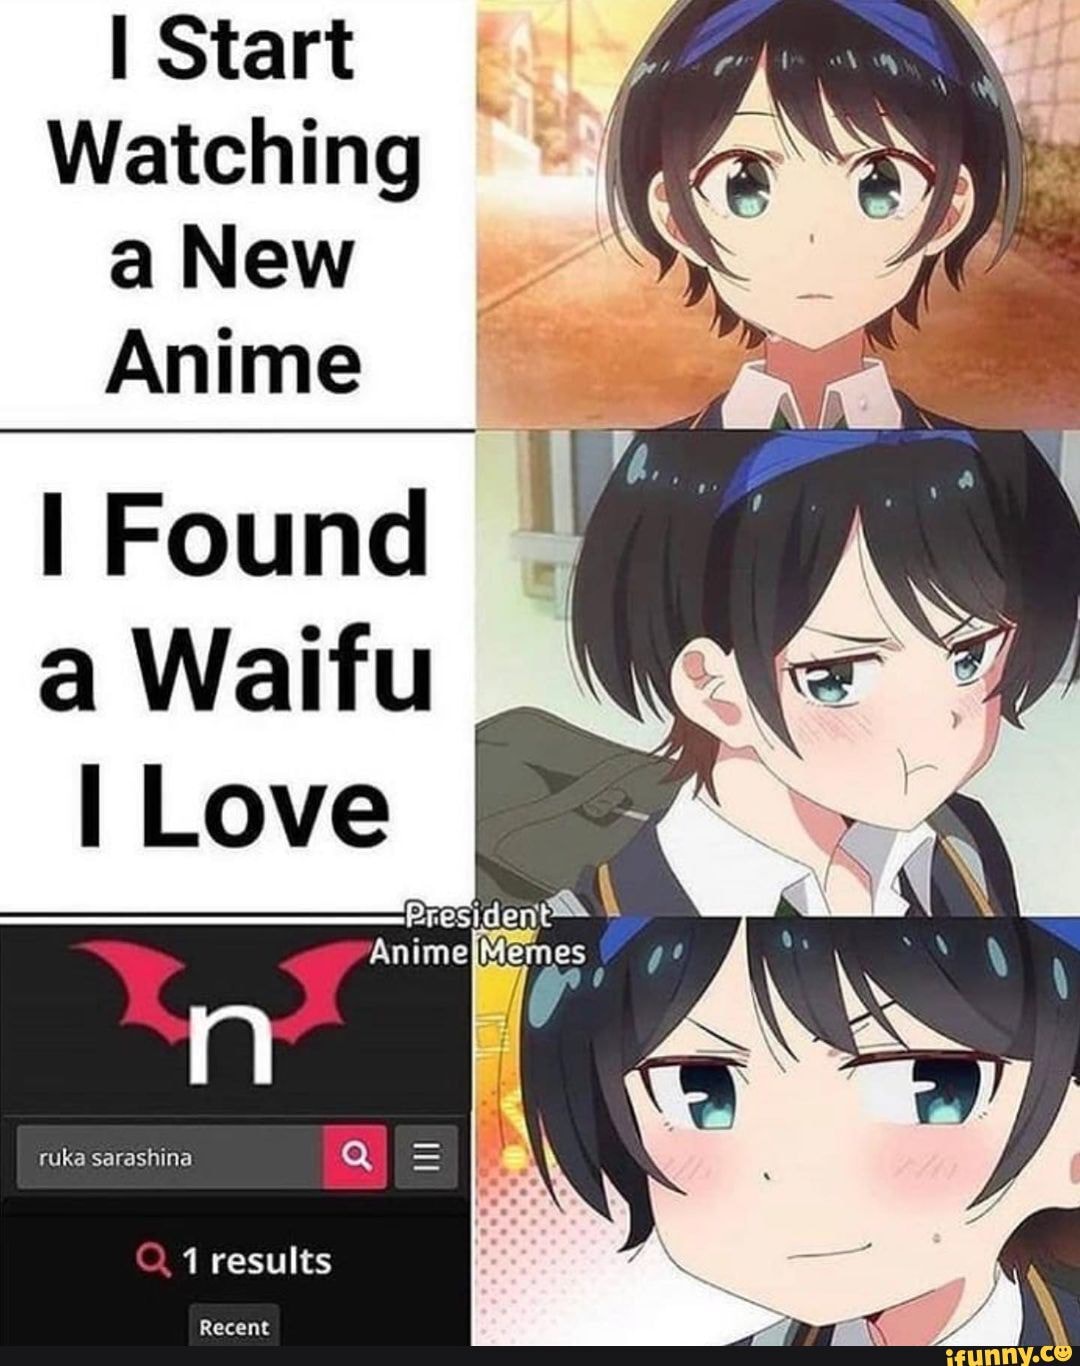 I Start Watching a New Anime 1 results 